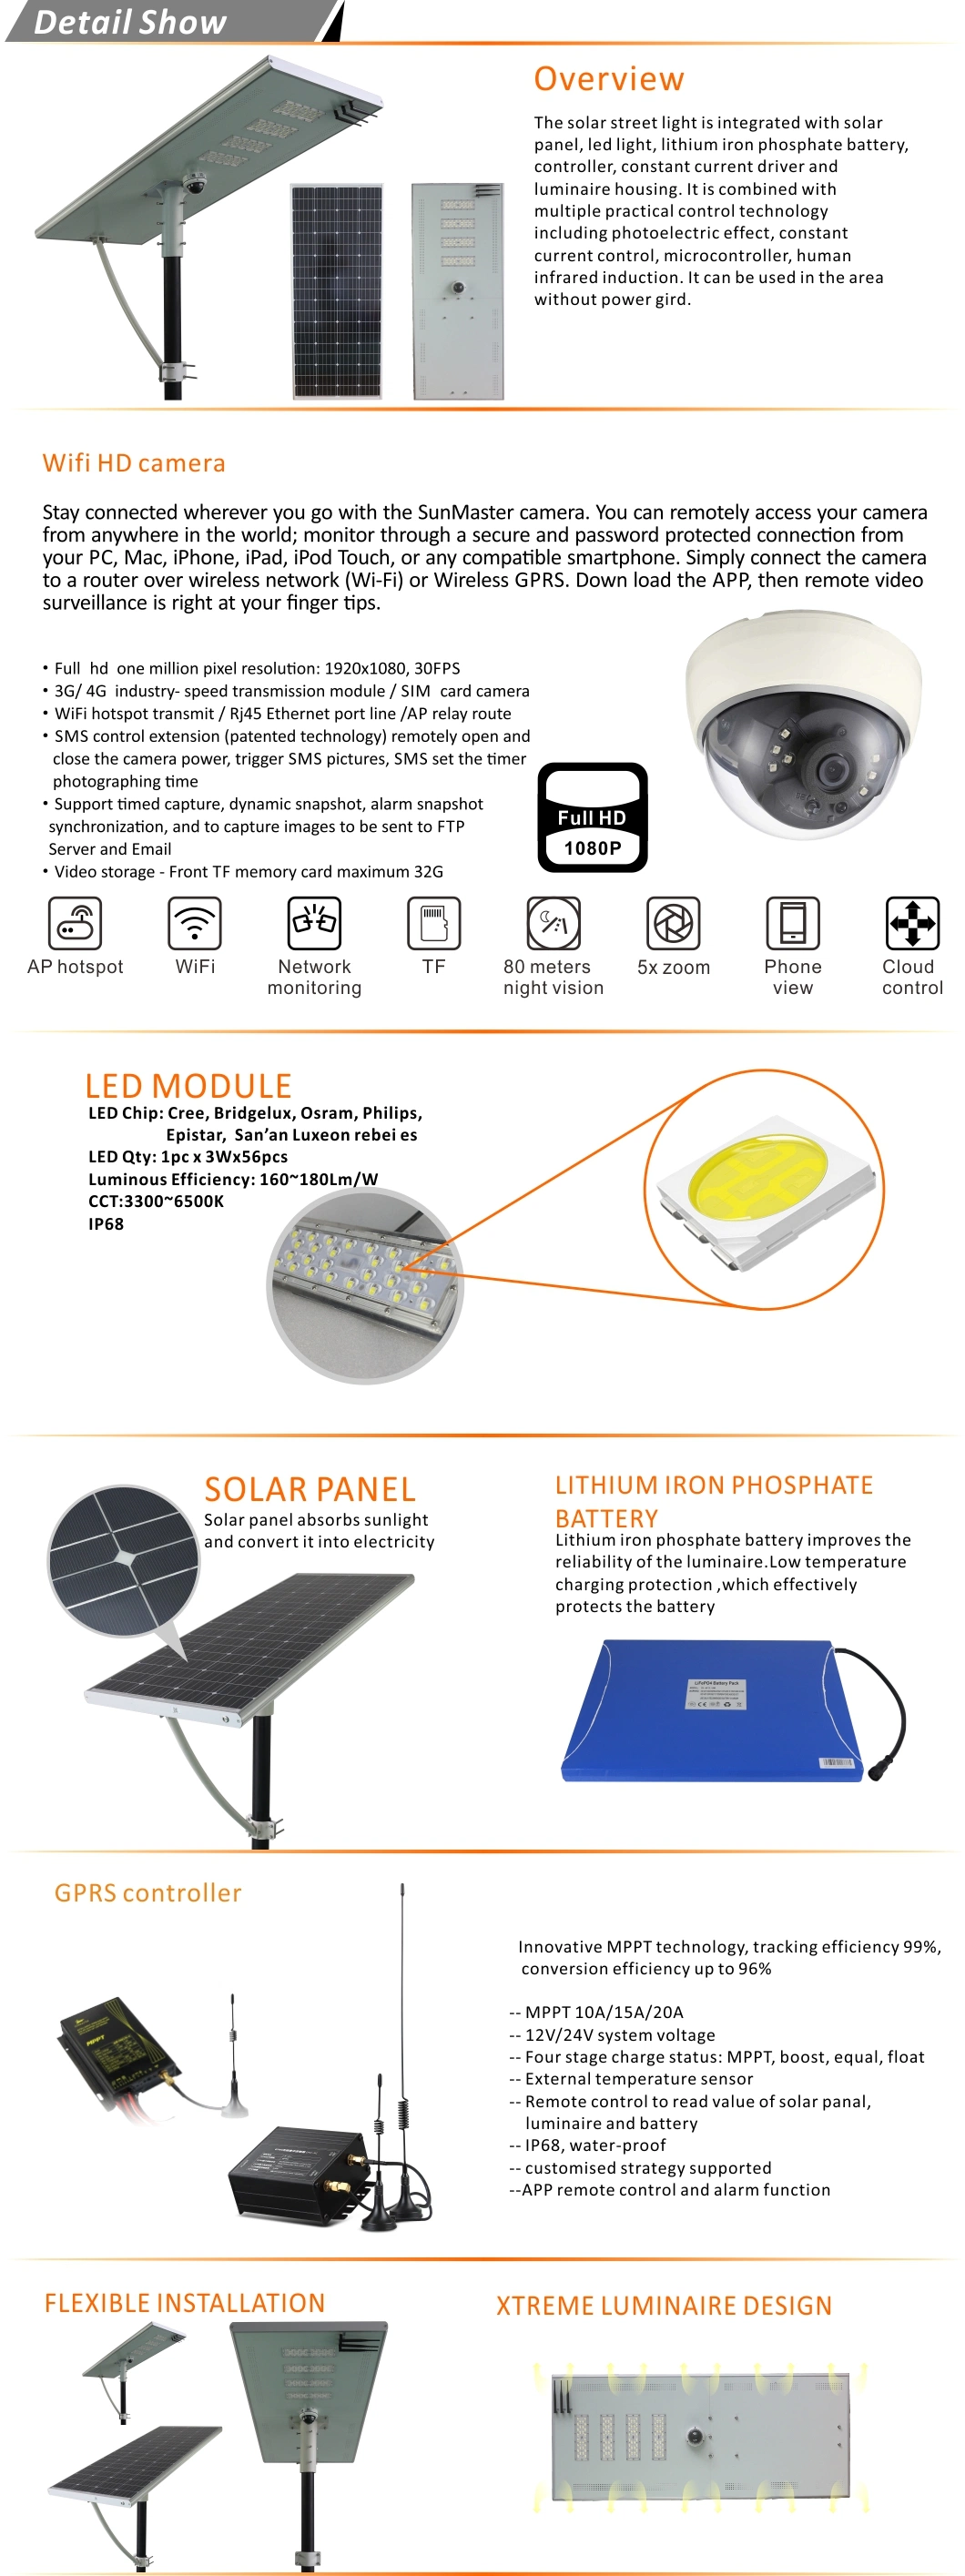 Integrated Solar Street Light with High-Definition Camera and GPRS Remote Management